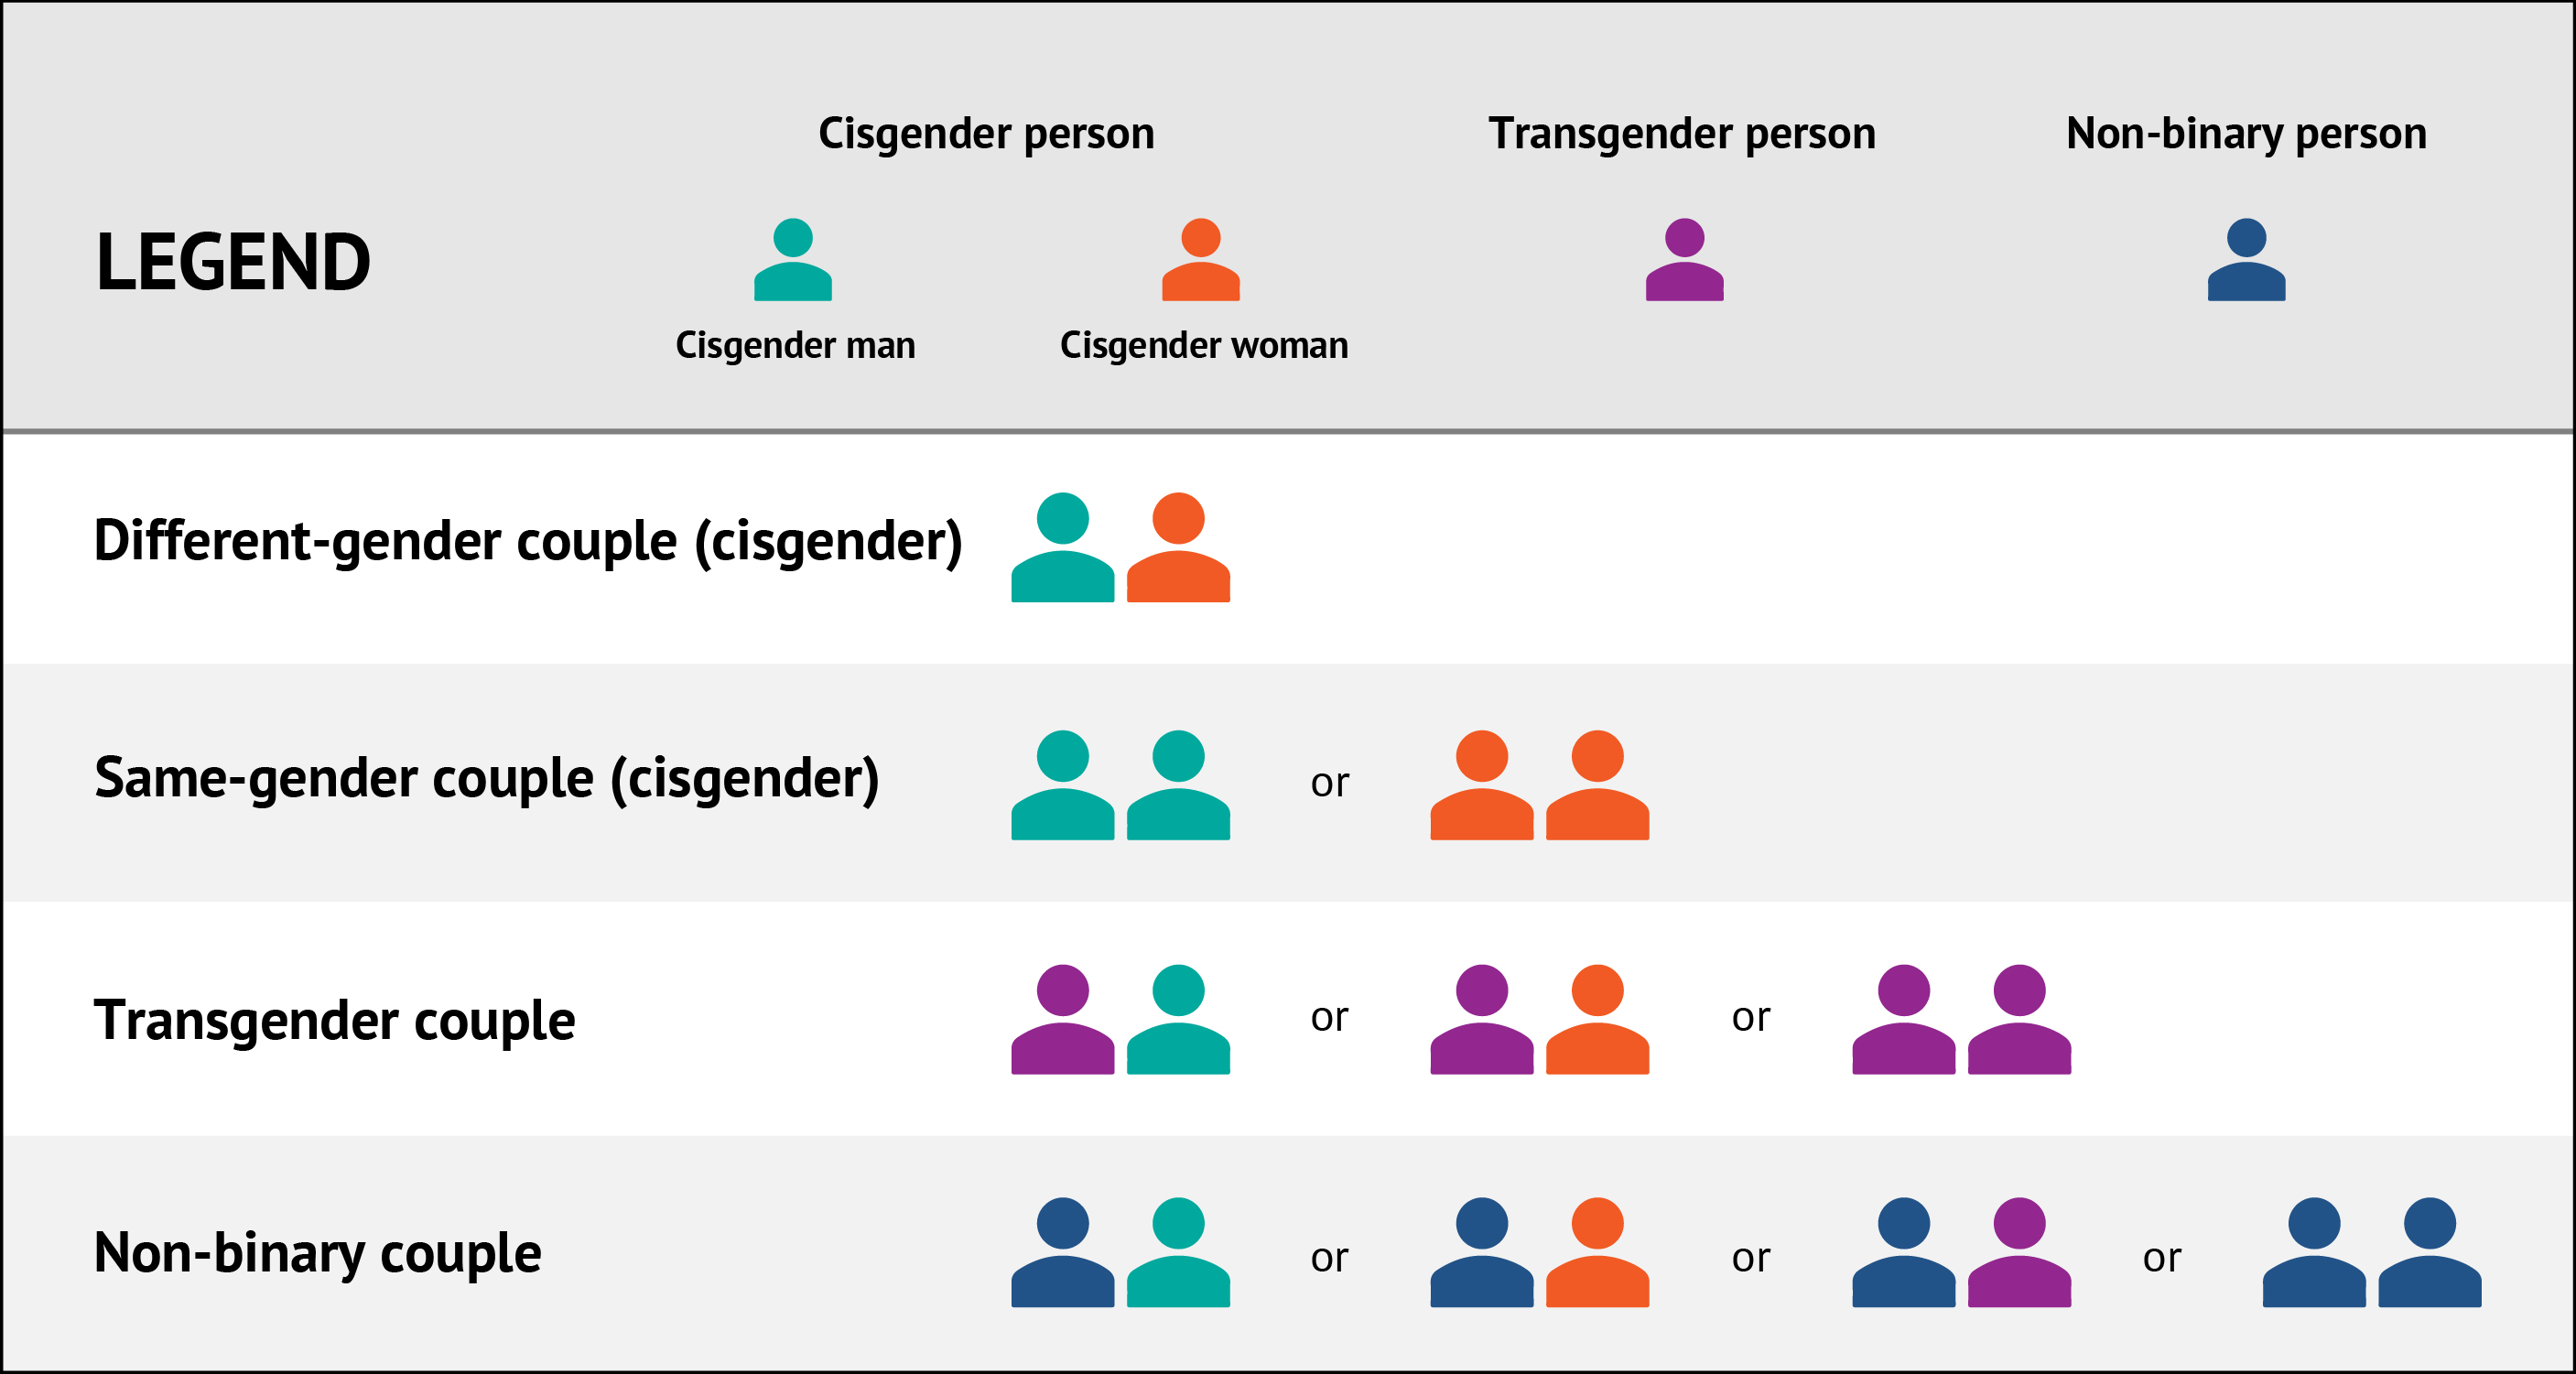 Figure 1 Gender diversity status of couples: A visual guide